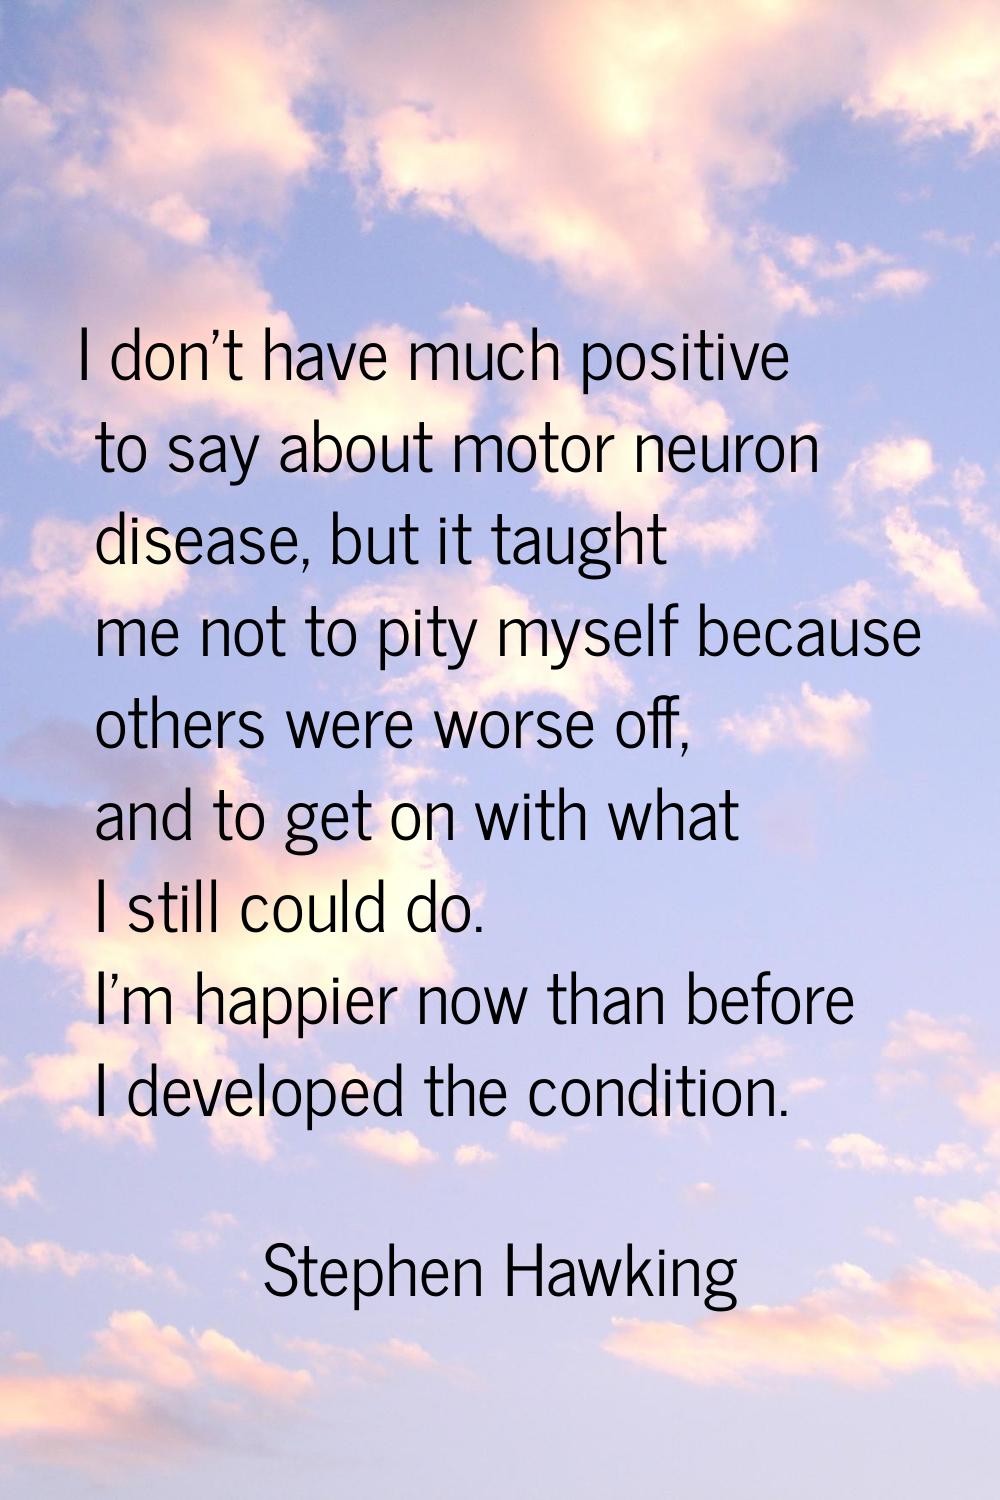 I don't have much positive to say about motor neuron disease, but it taught me not to pity myself b